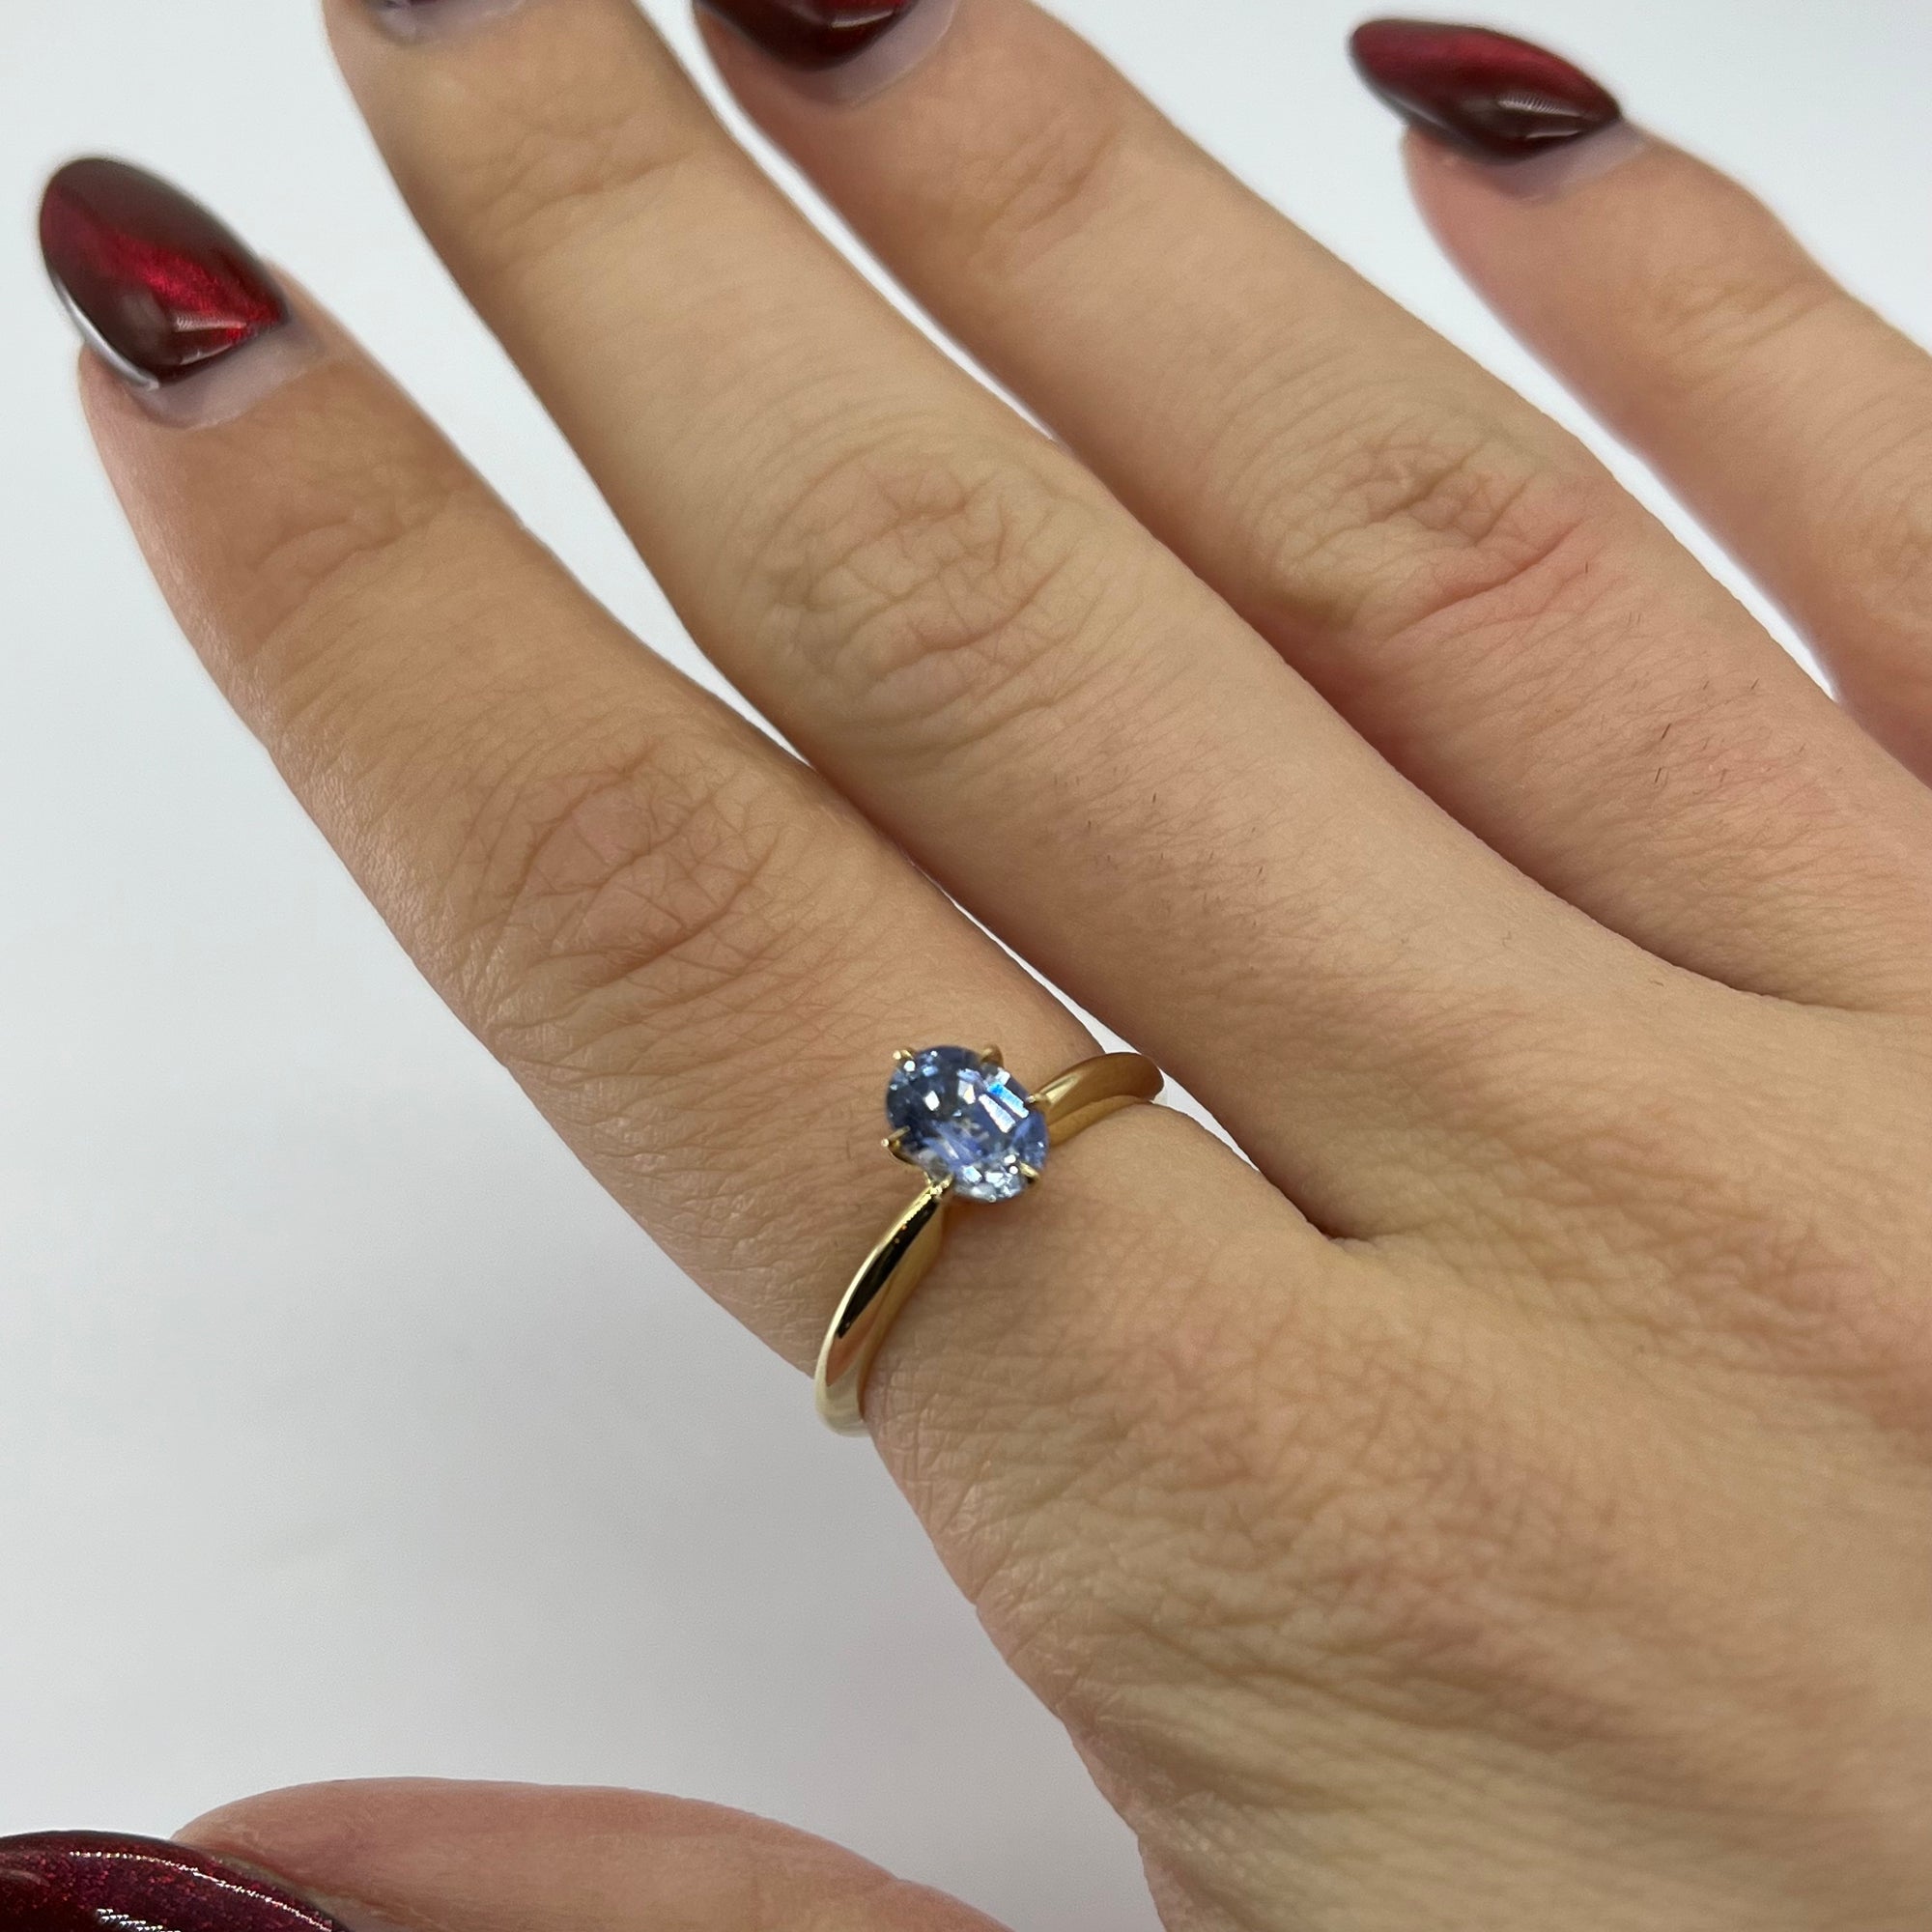 '100 Ways' Oval Sapphire Solitaire Ring | 1.08ct | SZ 6.25 |